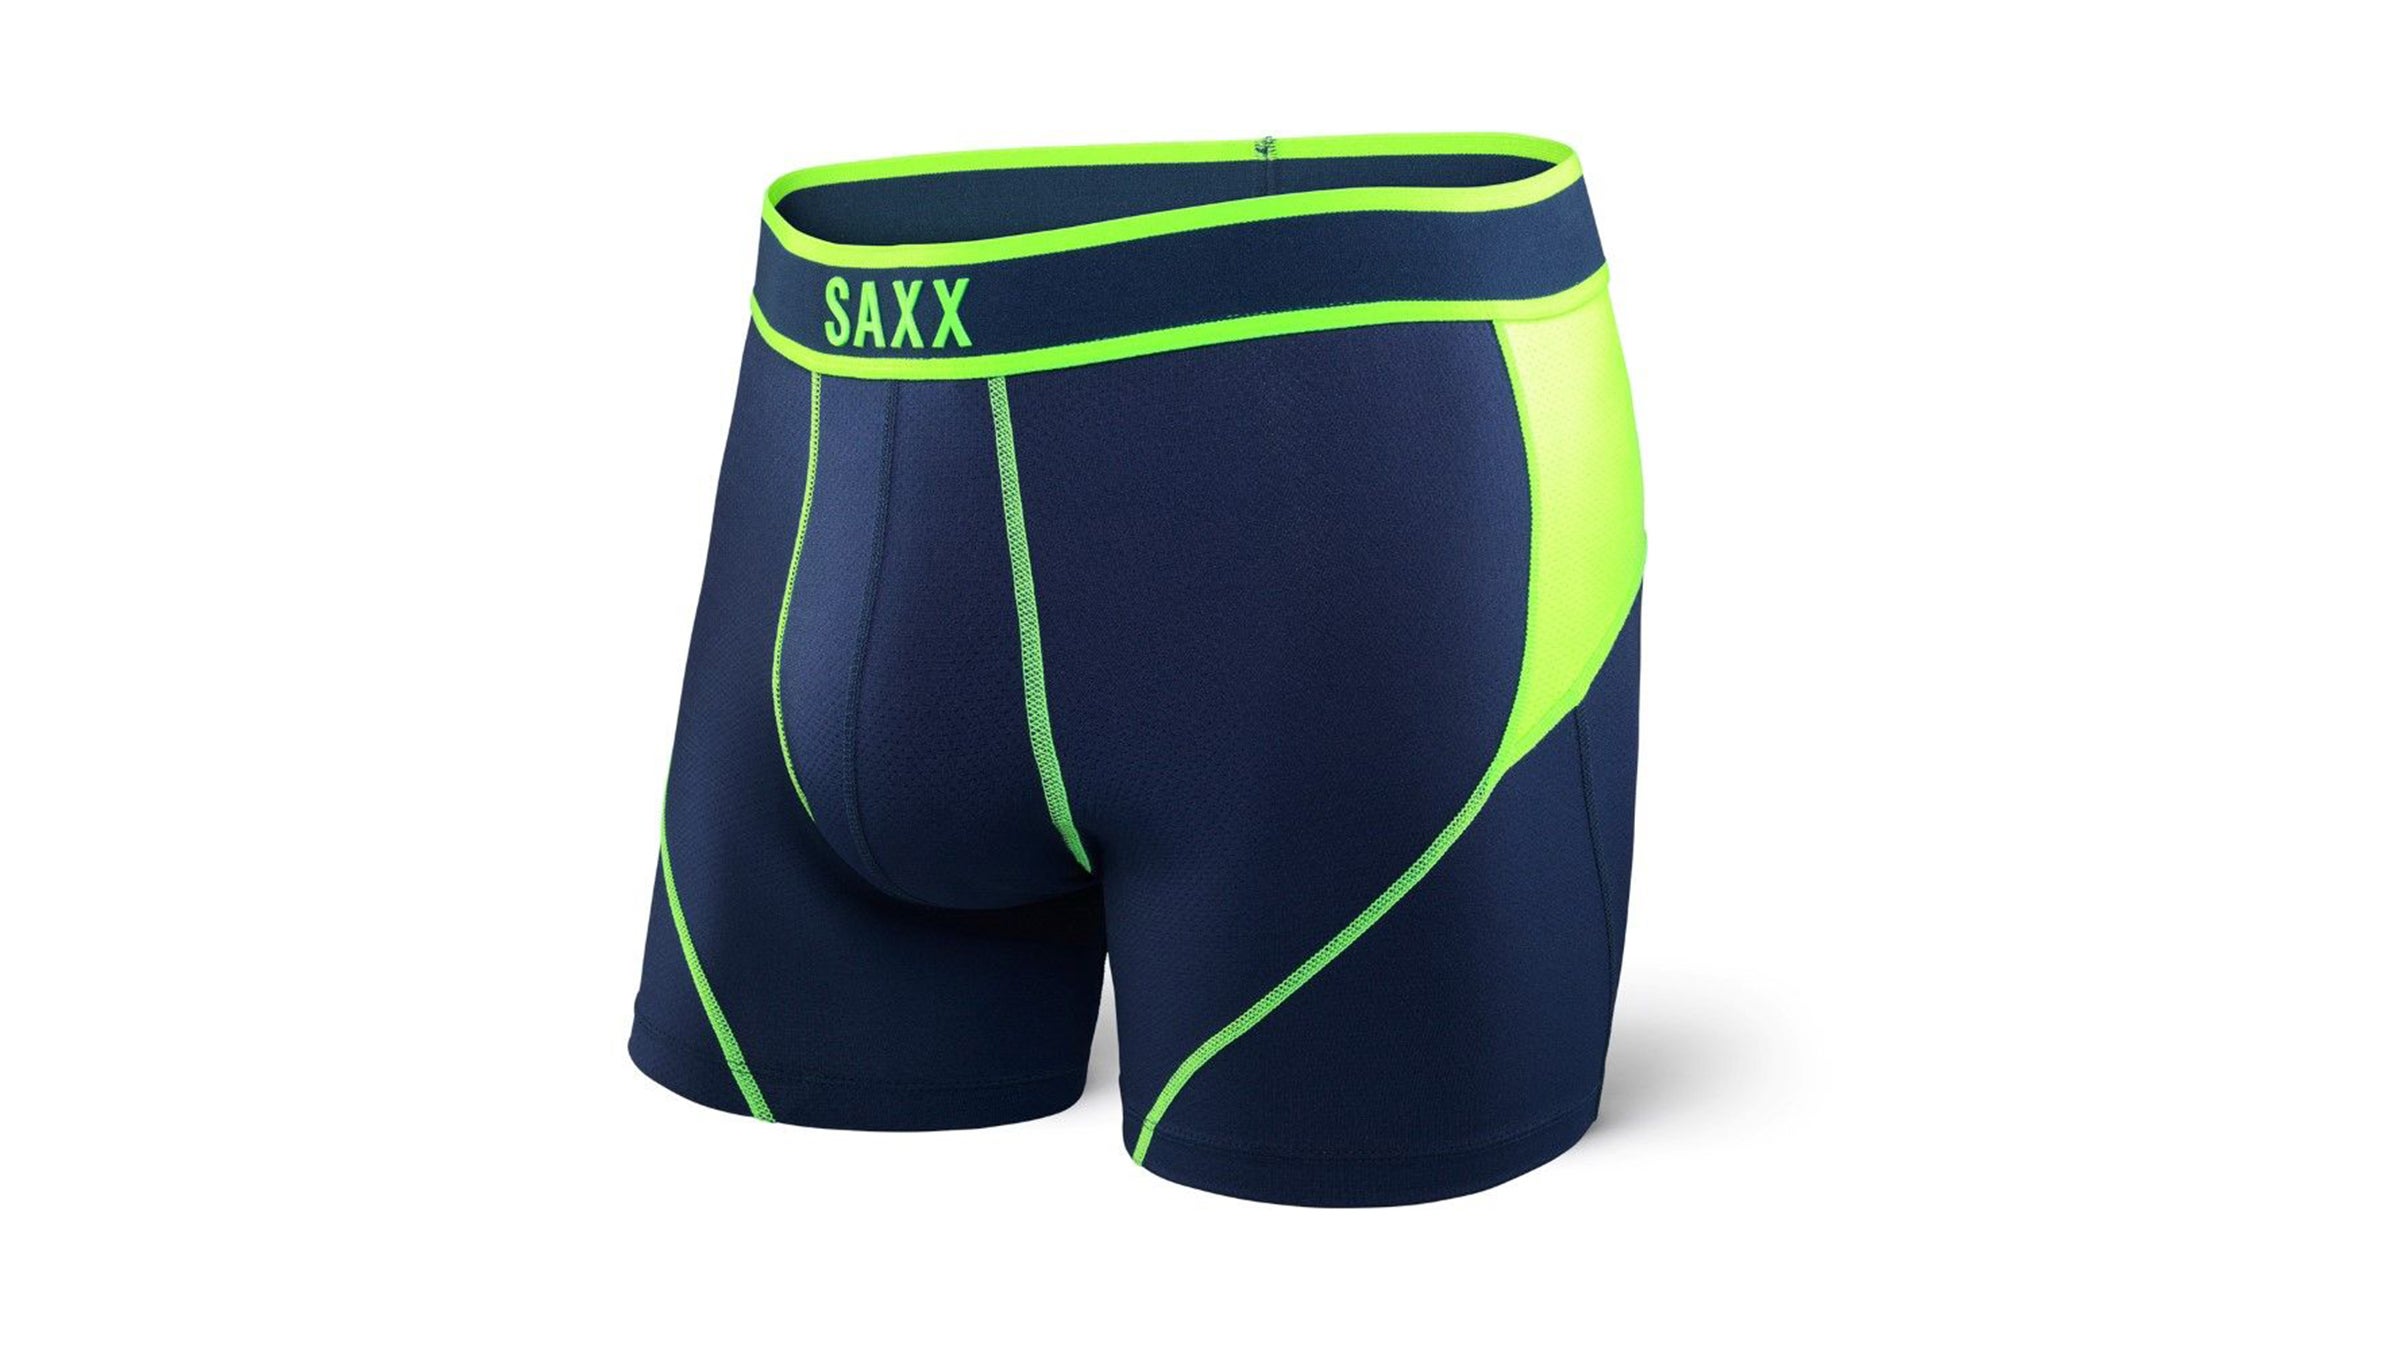 Saxx Kinetic Boxer Brief - Review